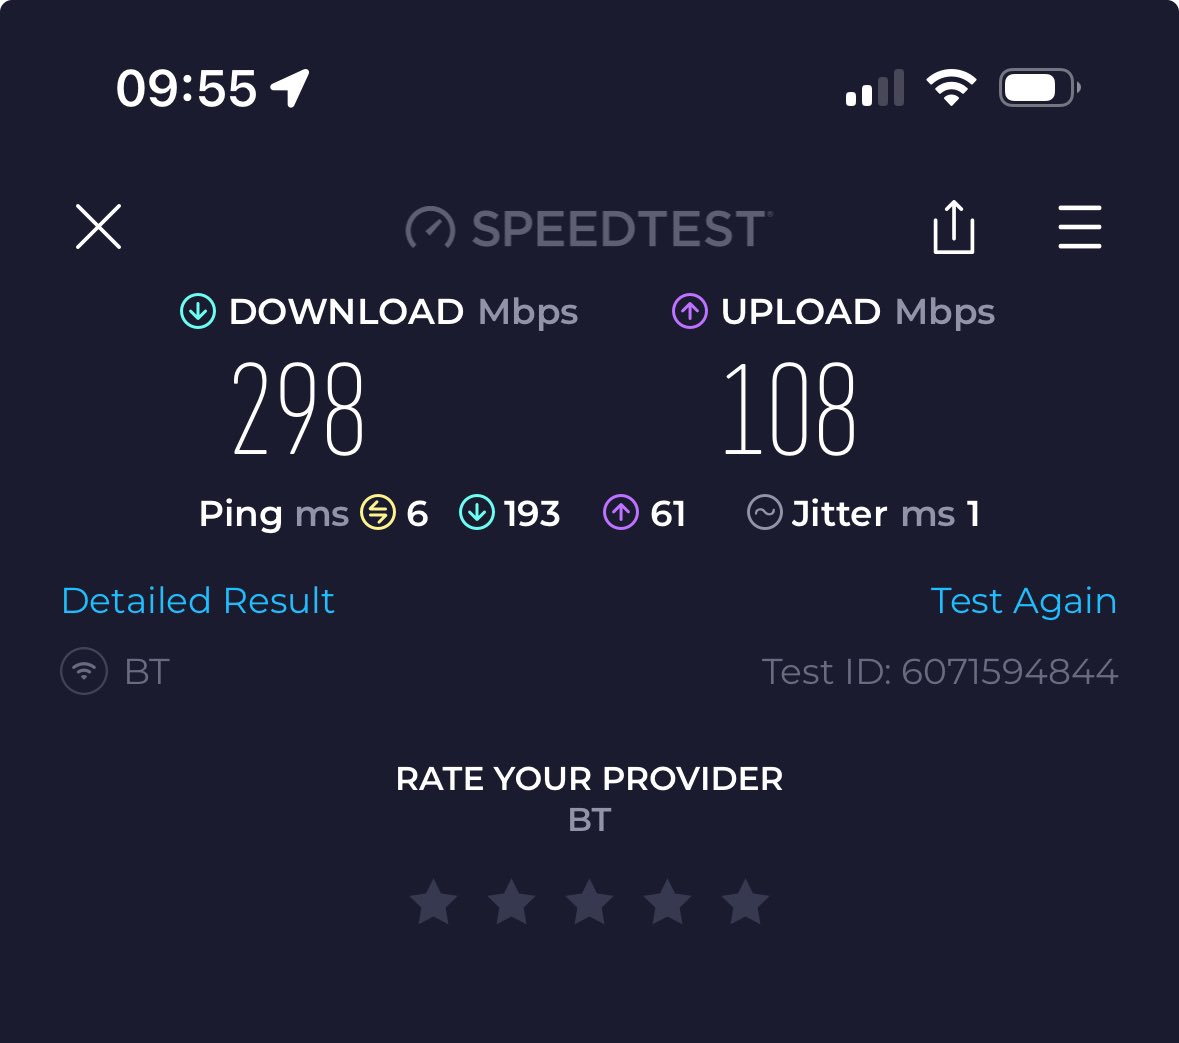 @NiallEco I’ve been trying to bin off my phone line for years! Haha!

Still have FTTP too, starlink is backup and for road trips. Was super helpful when a tree took out all of our roads fibre for 3 weeks!

This is what I get on 1000mbps fibre via WiFi, full 950-980mbps via cable.